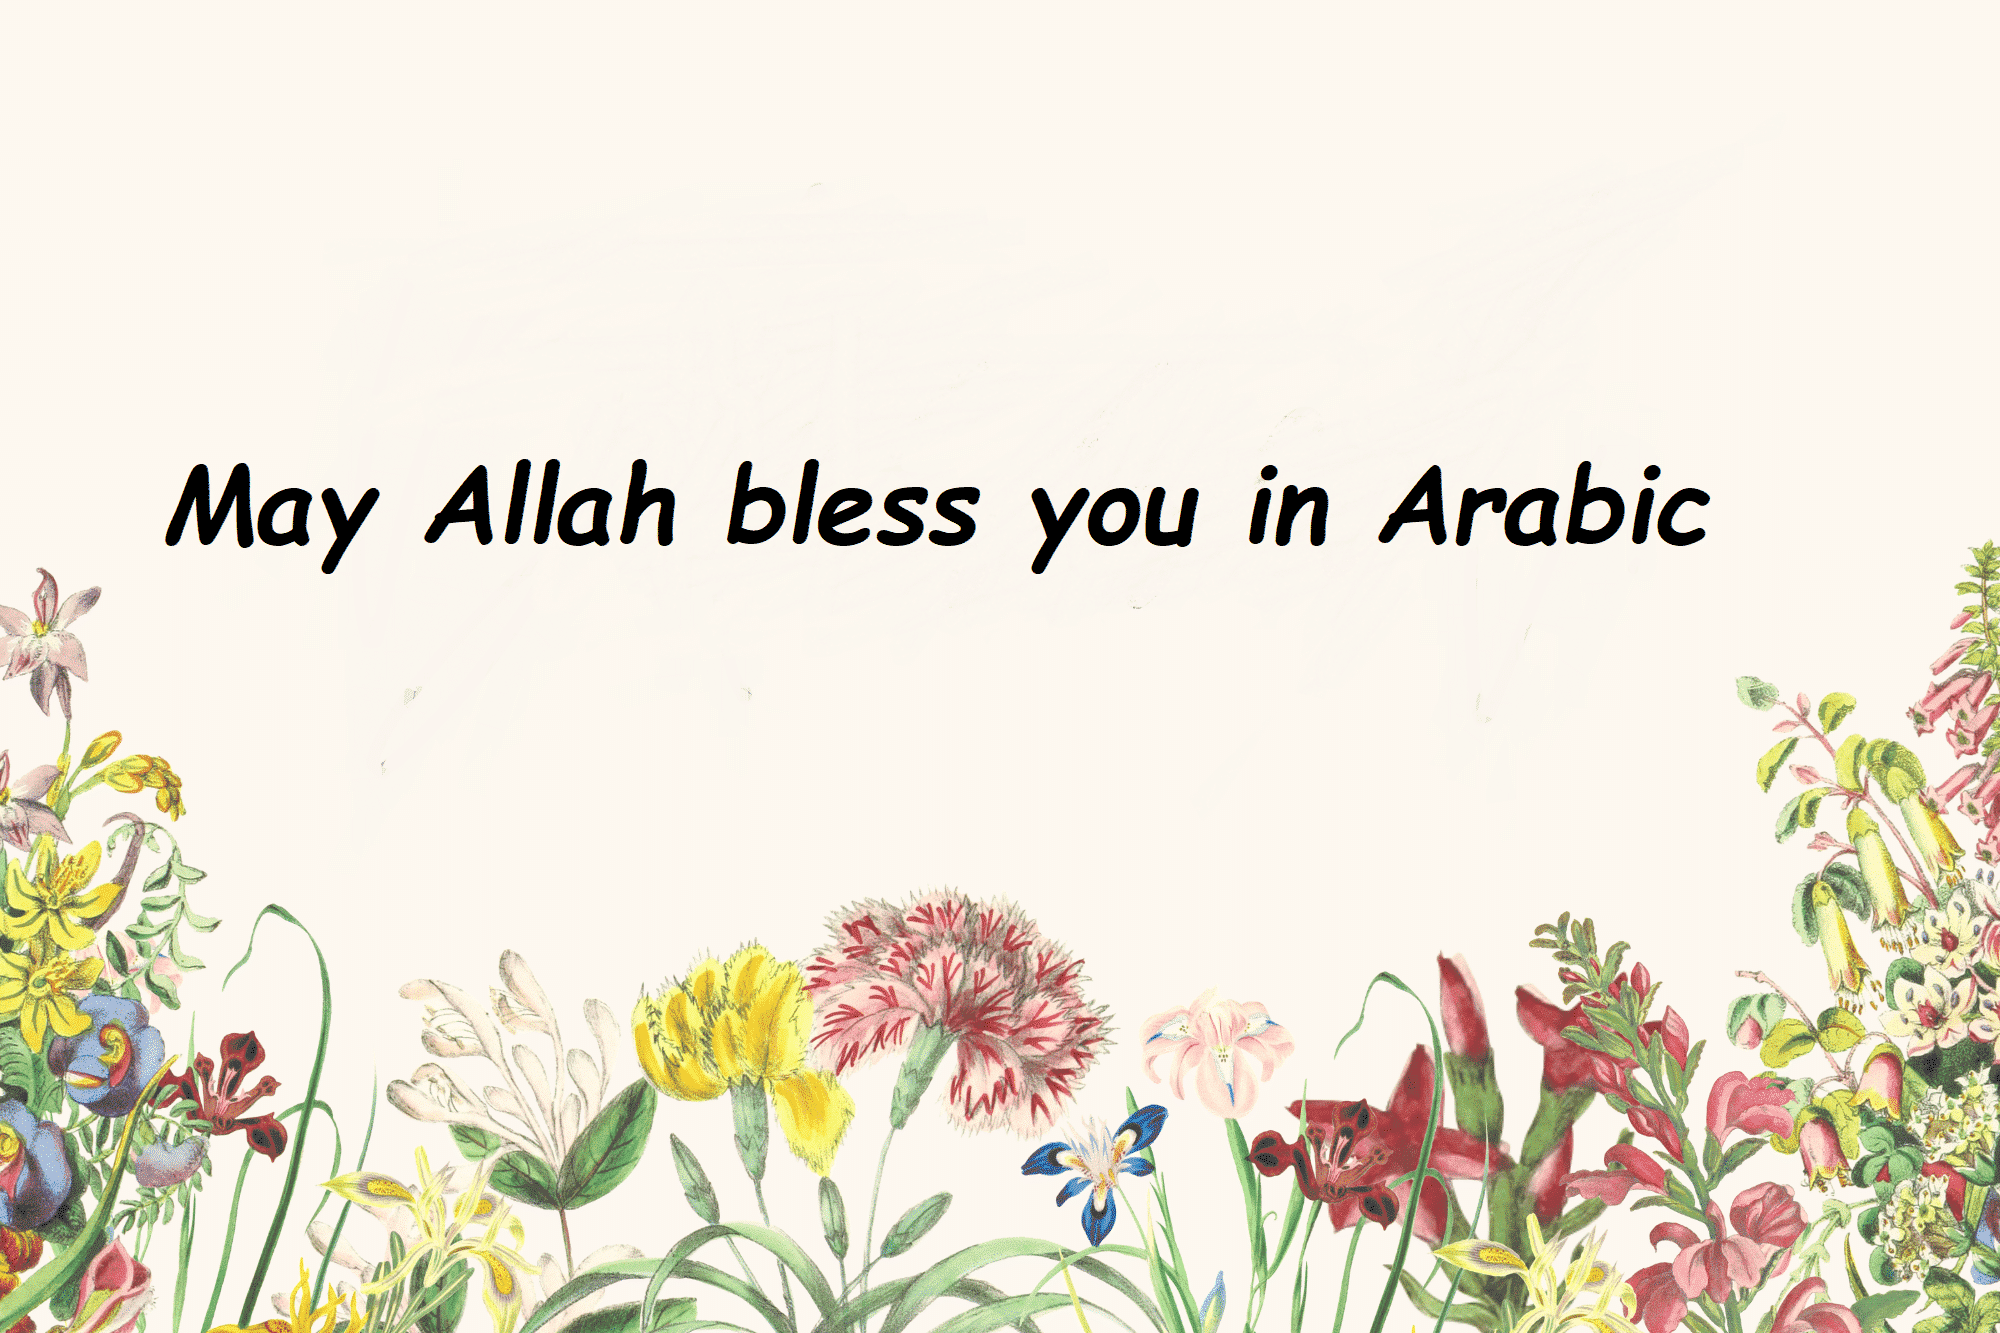 May Allah bless you in Arabic